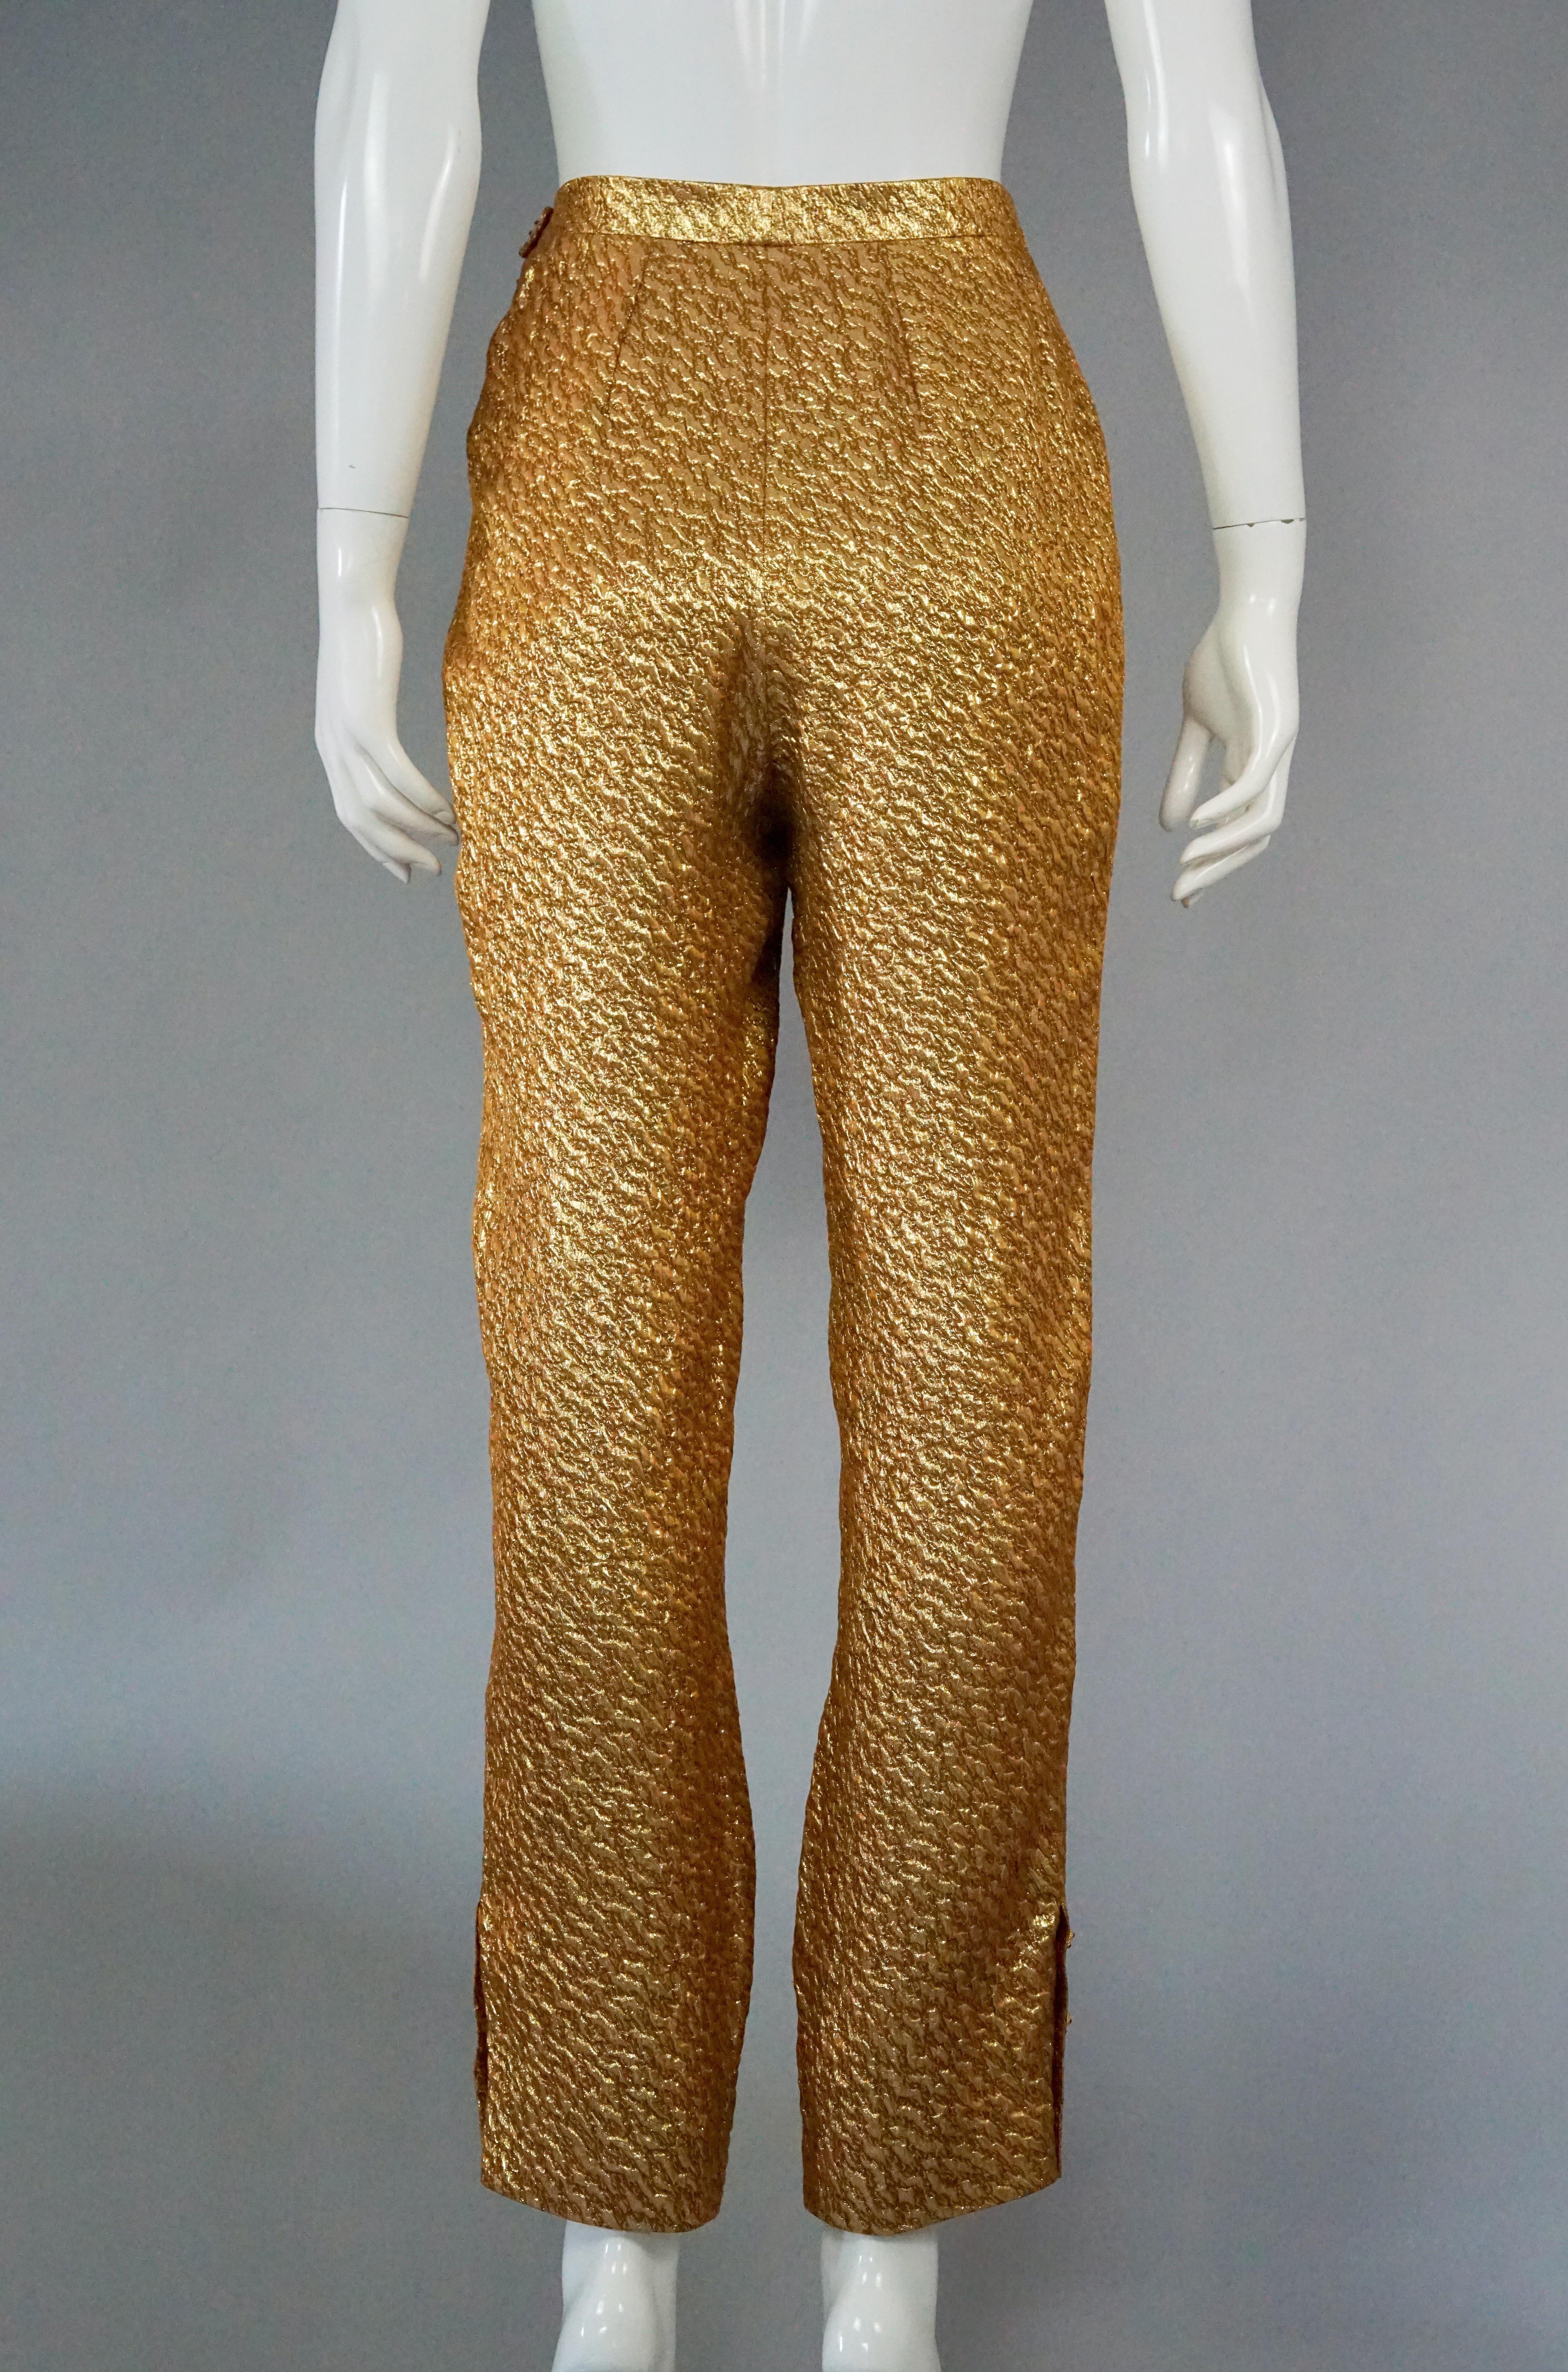 Vintage 1996 CHANEL Gold Brocade Silk Lurex with Gripoix Buttons Trouser Pants 1